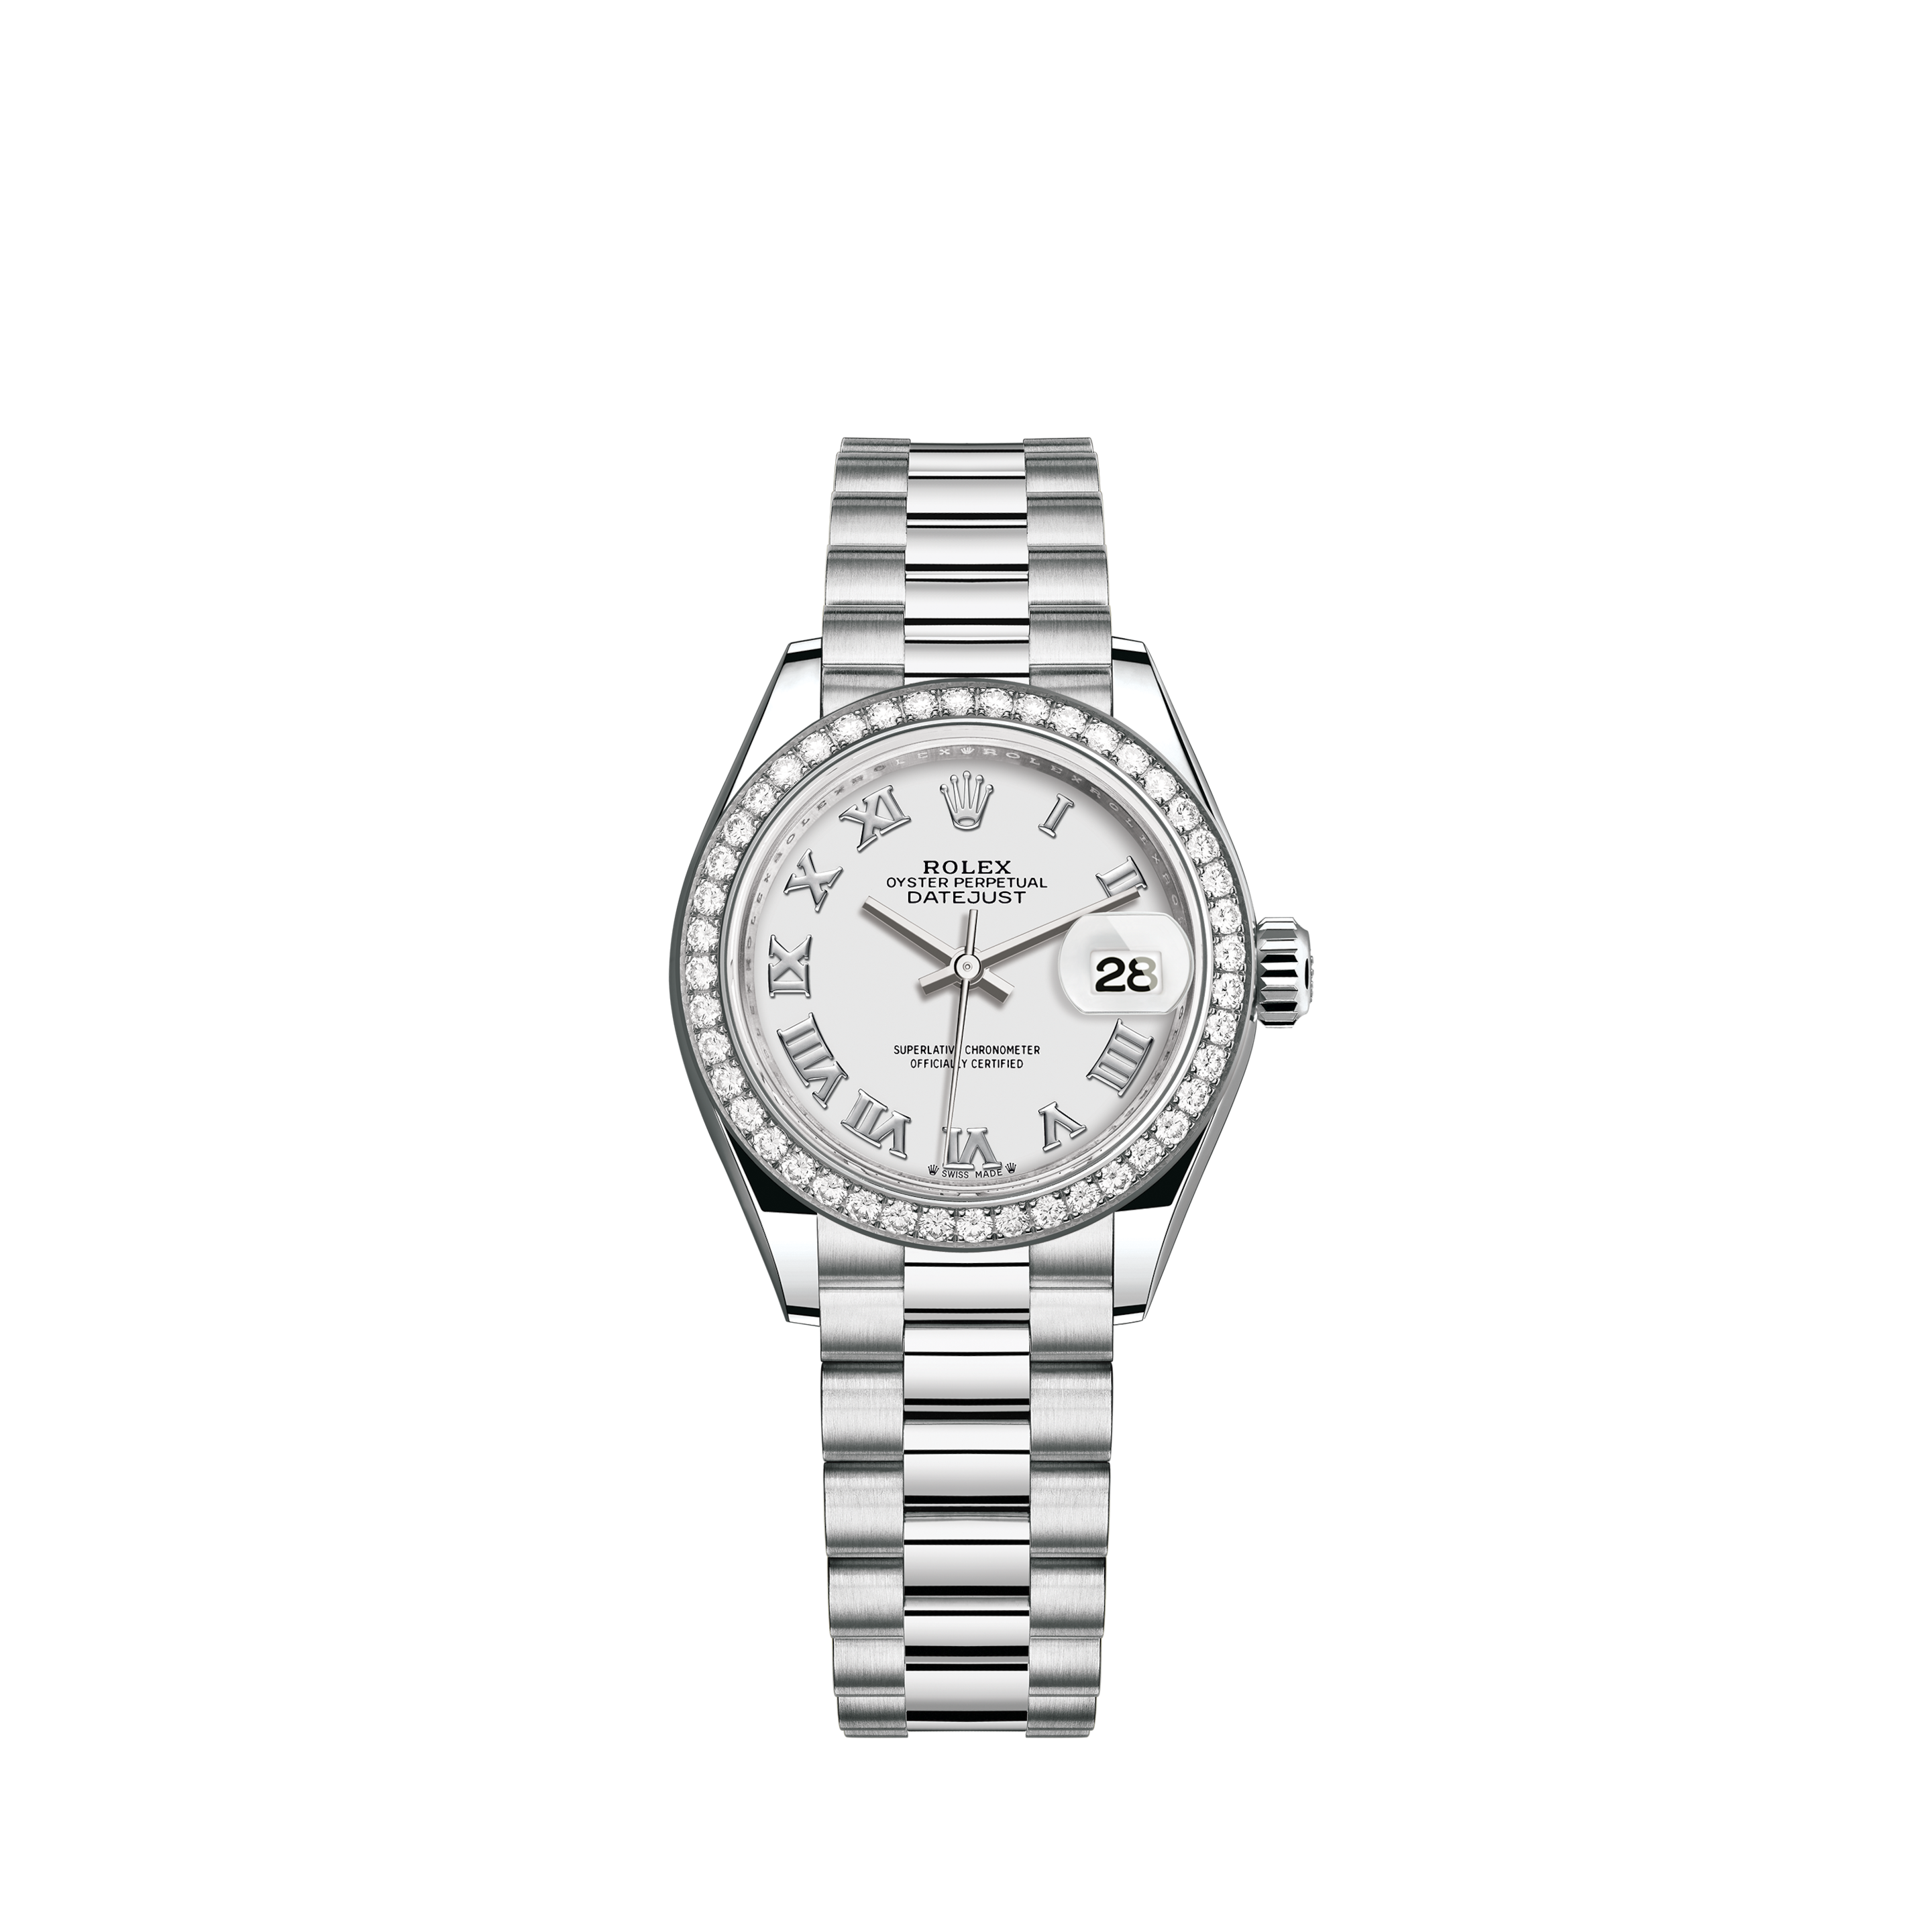 Rolex Oyster Perpetual 36mm Datejust Diamond Bezel White Mother of Pearl Diamond Dial Jubilee Watch 16233